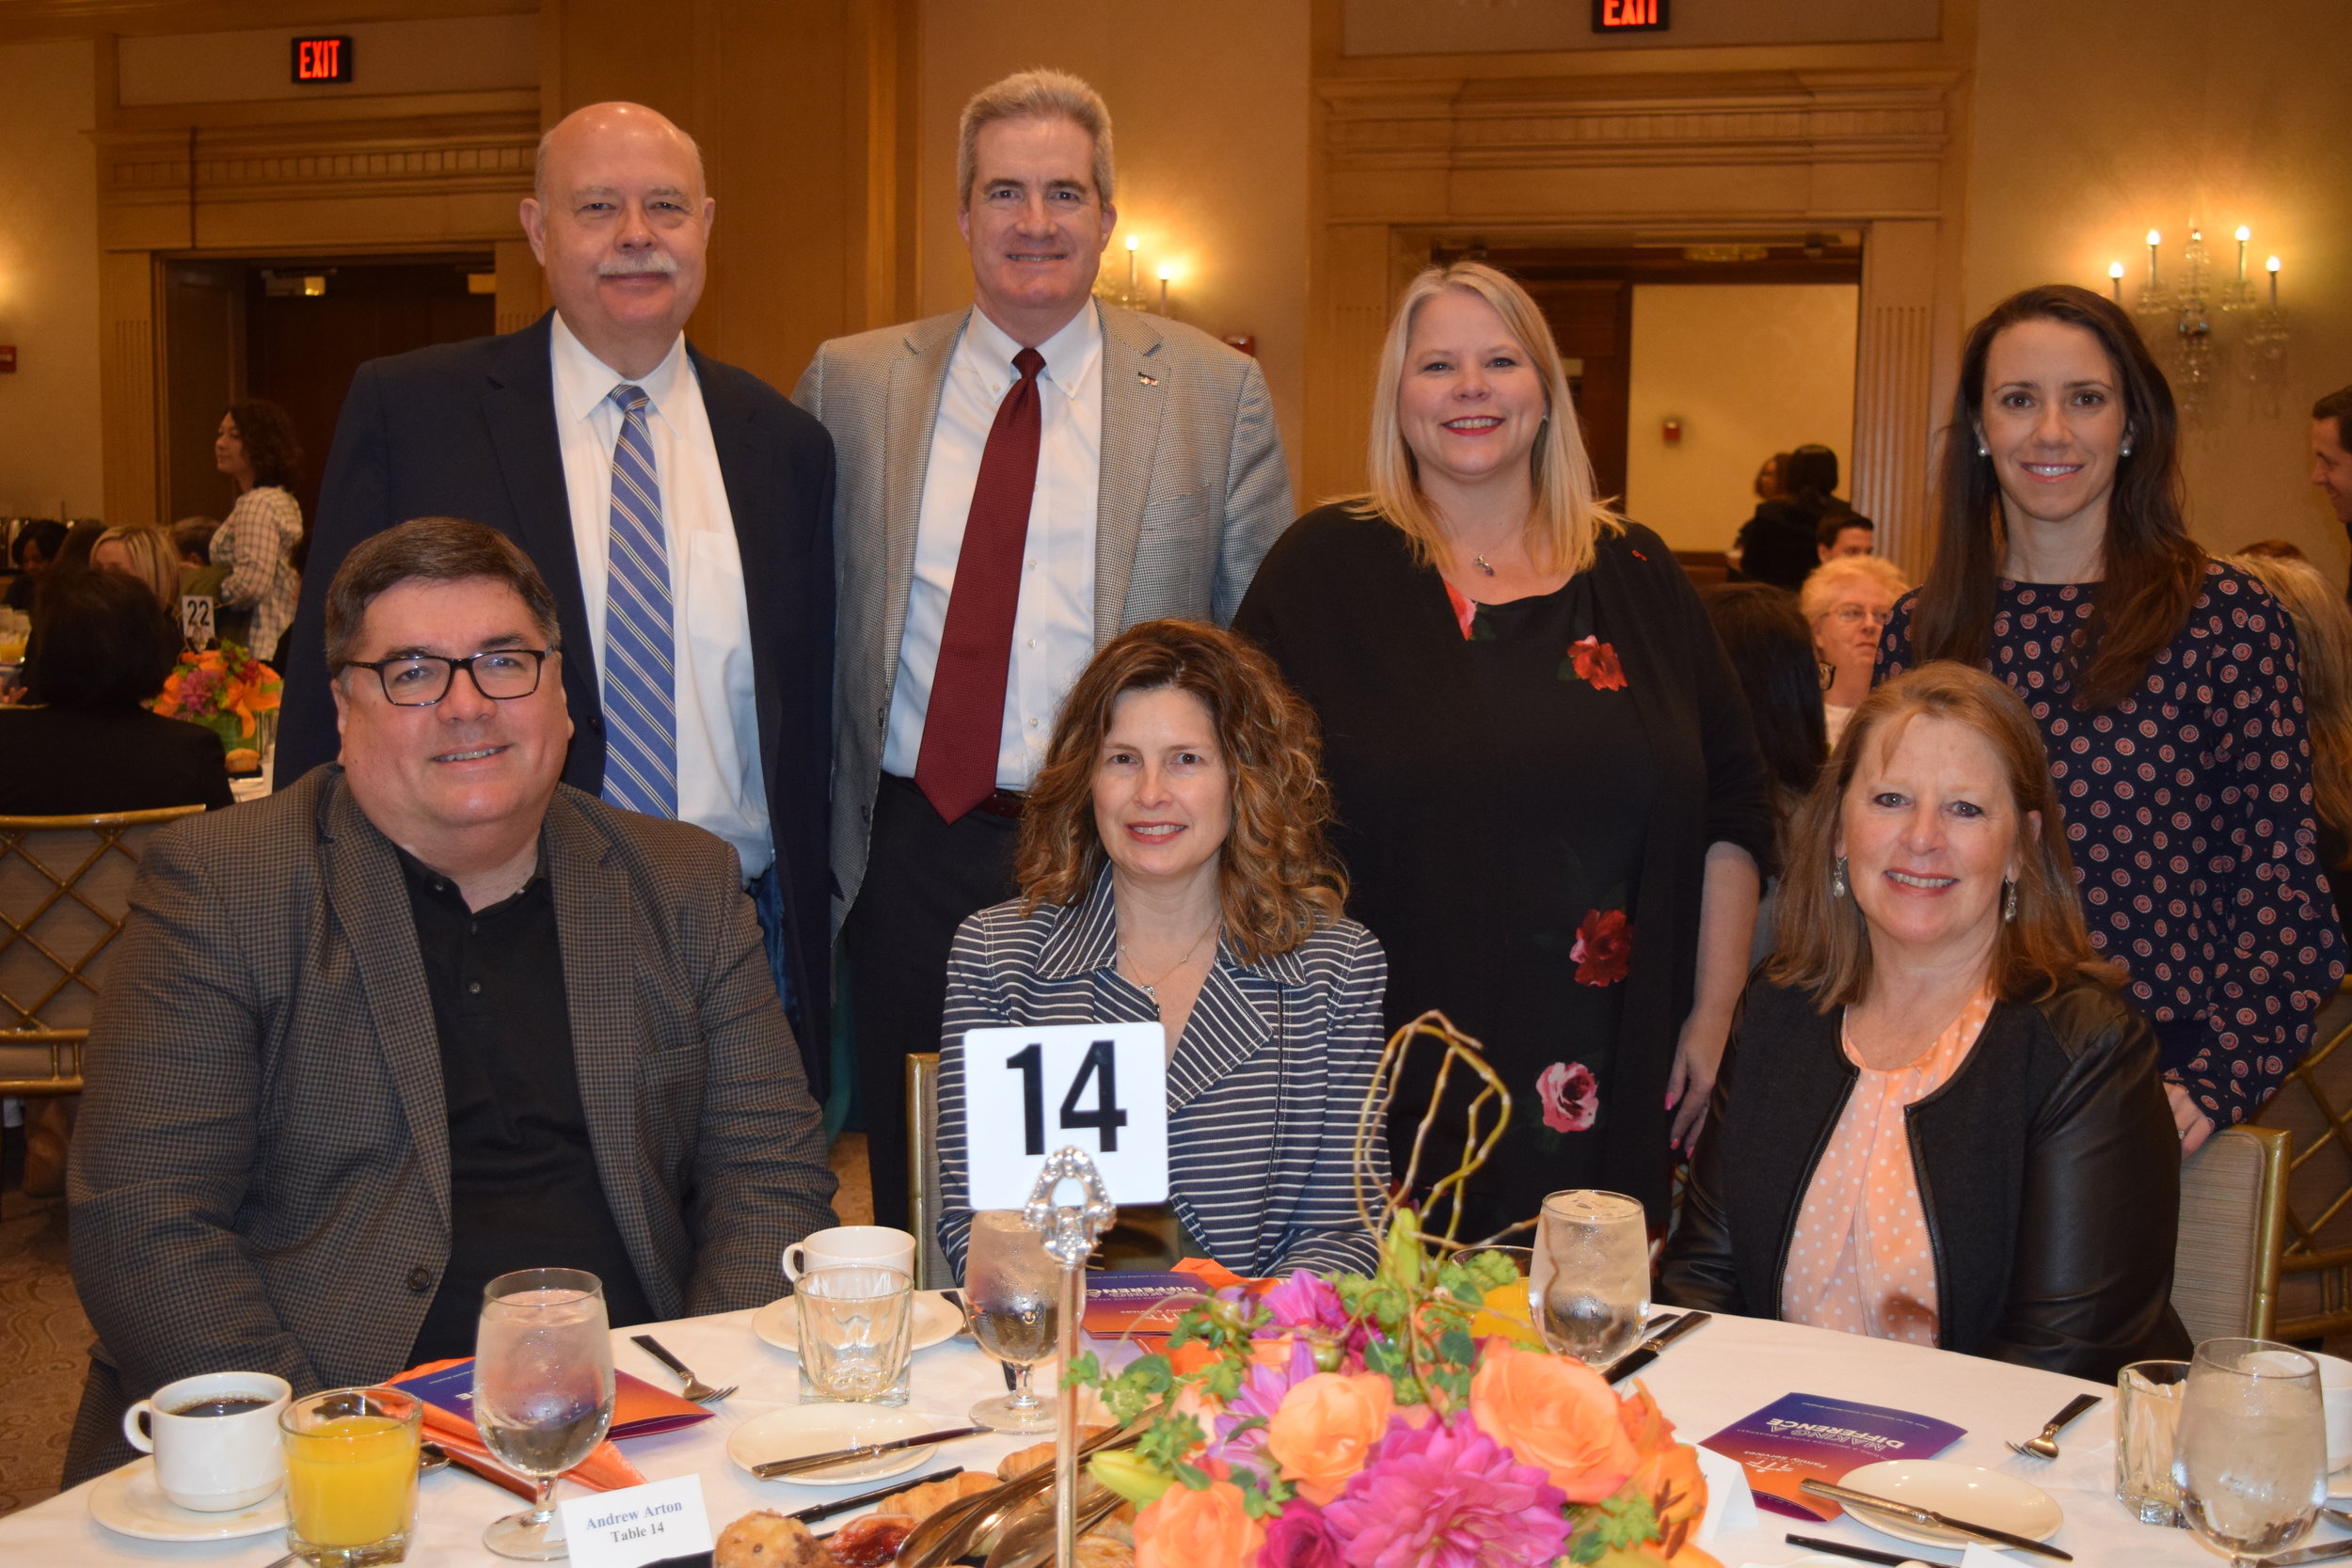 Representatives of breakfast sponsor KeyBank, including board member Ted Willett (top row second from left), attended the event.